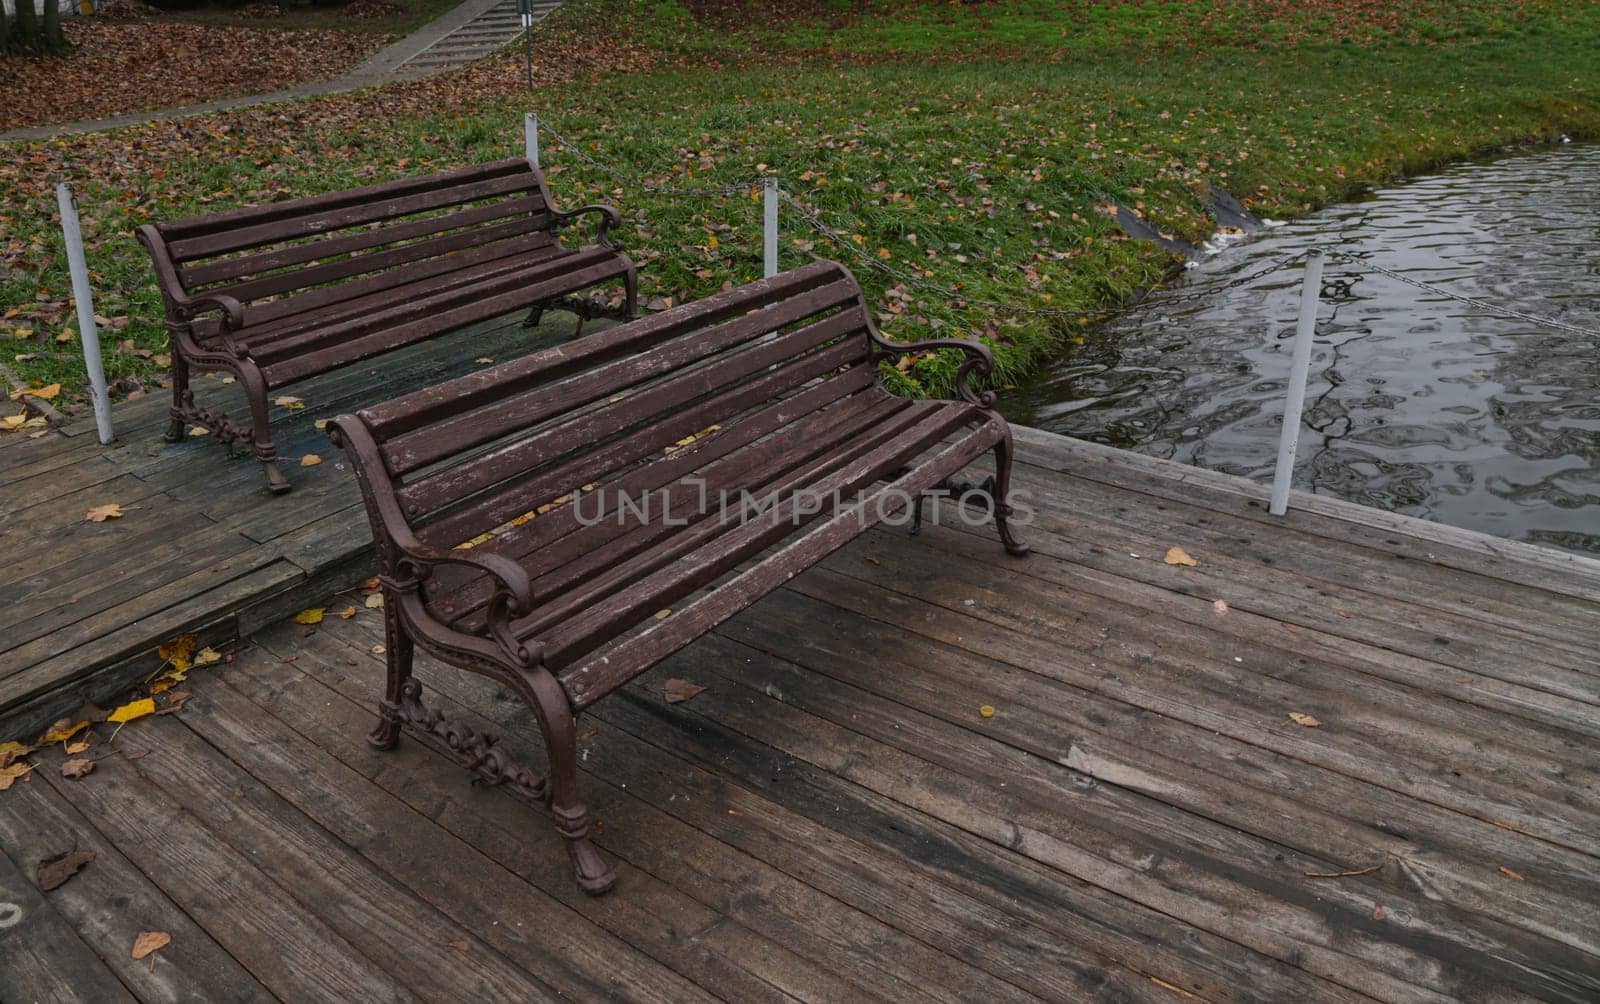 The benches on the wooden village pier. A place to rest on the bank of the river.